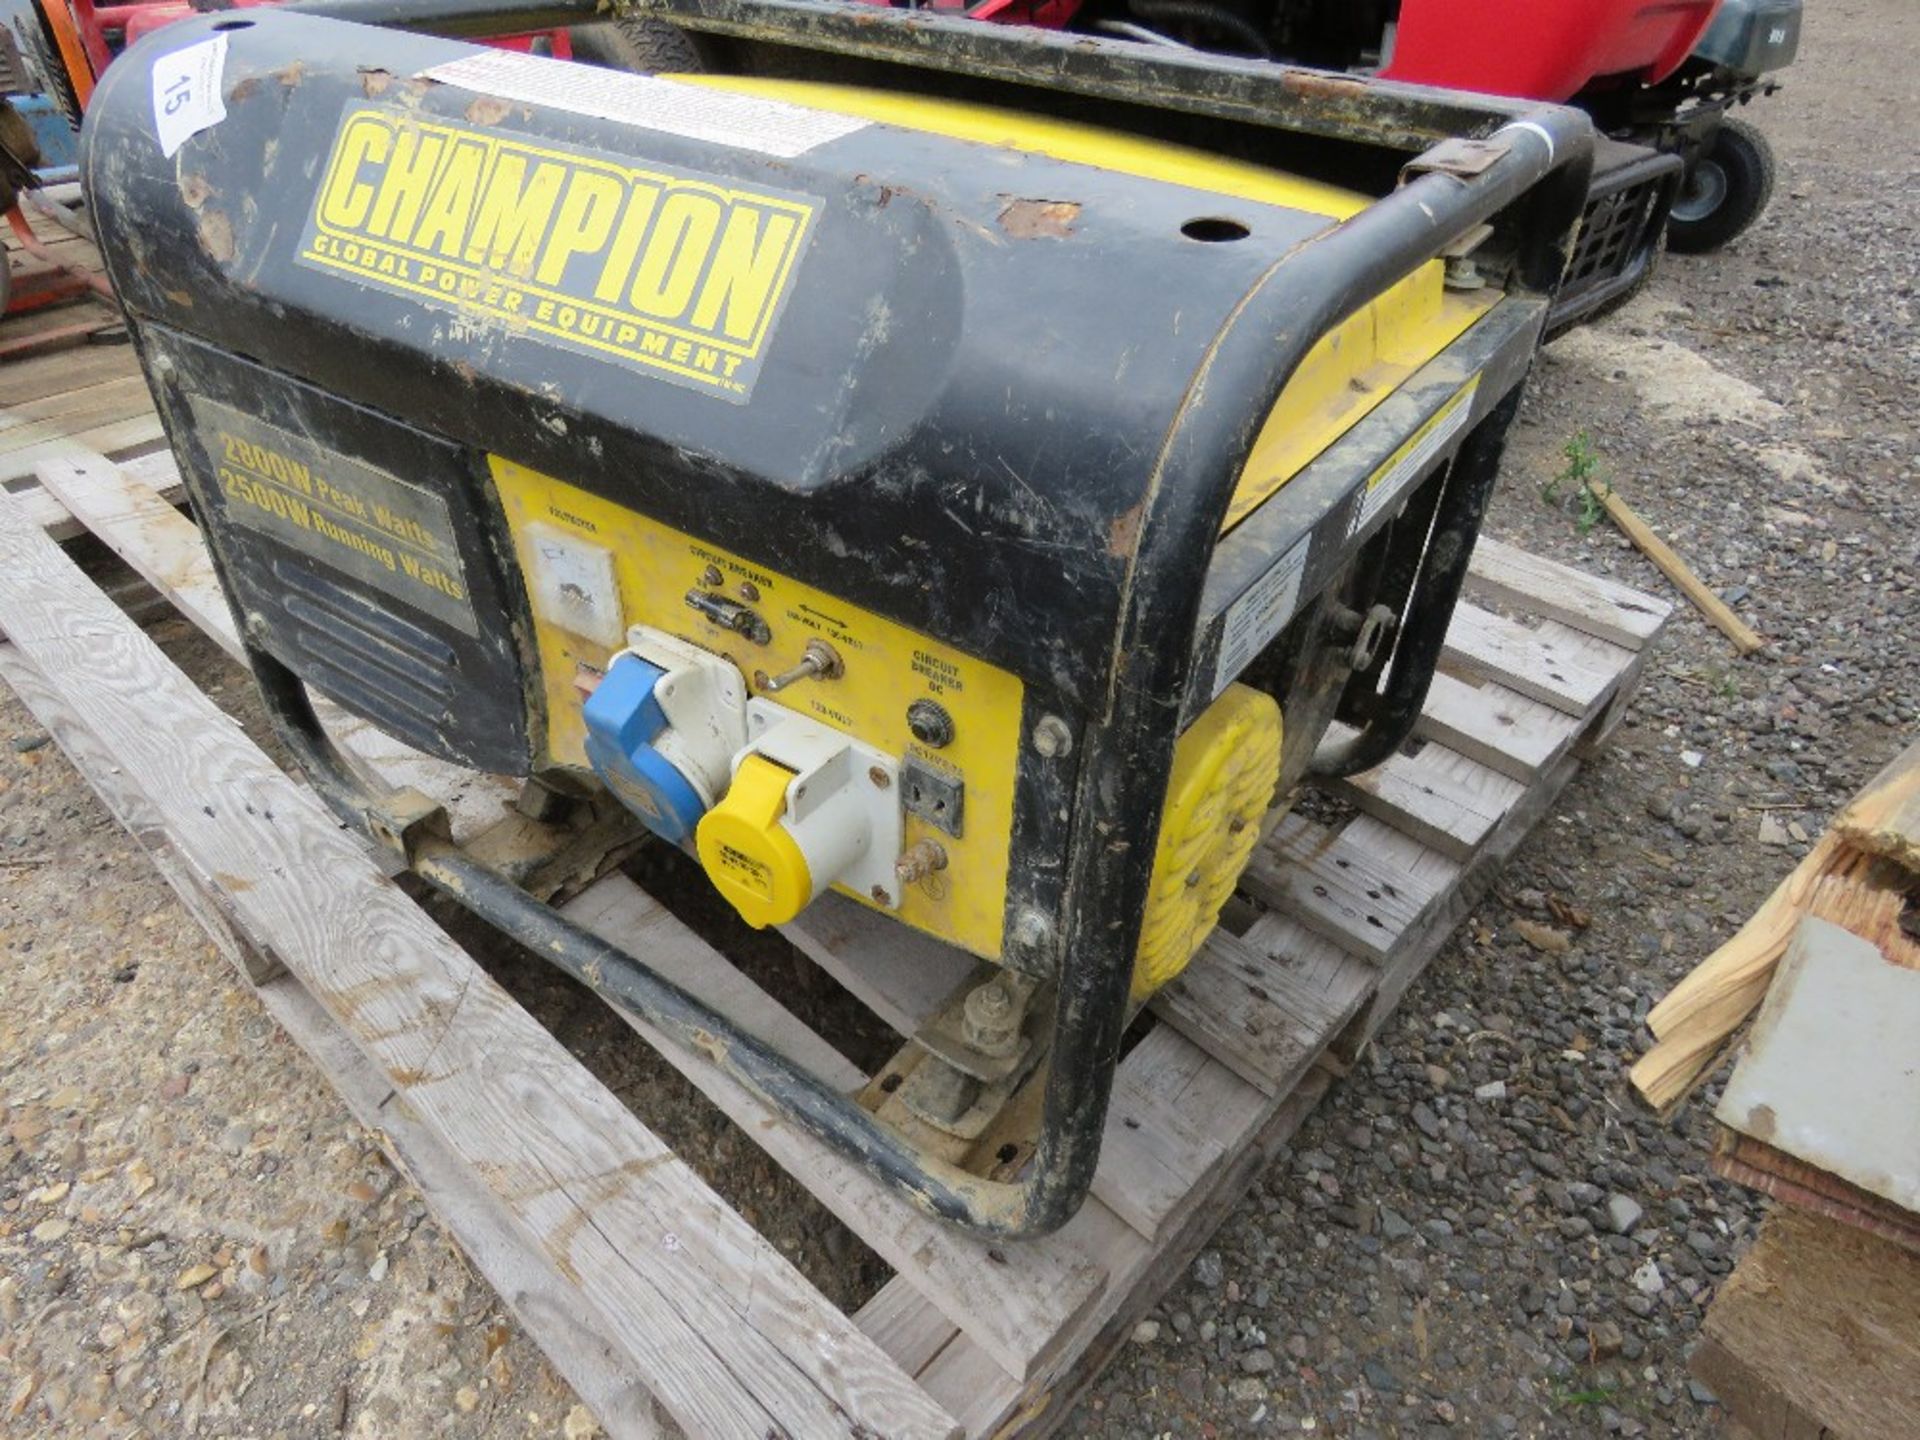 CHAMPION 2800WATT PETROL ENGINED GENERATOR. THIS LOT IS SOLD UNDER THE AUCTIONEERS MARGIN SCHEME, - Image 2 of 3